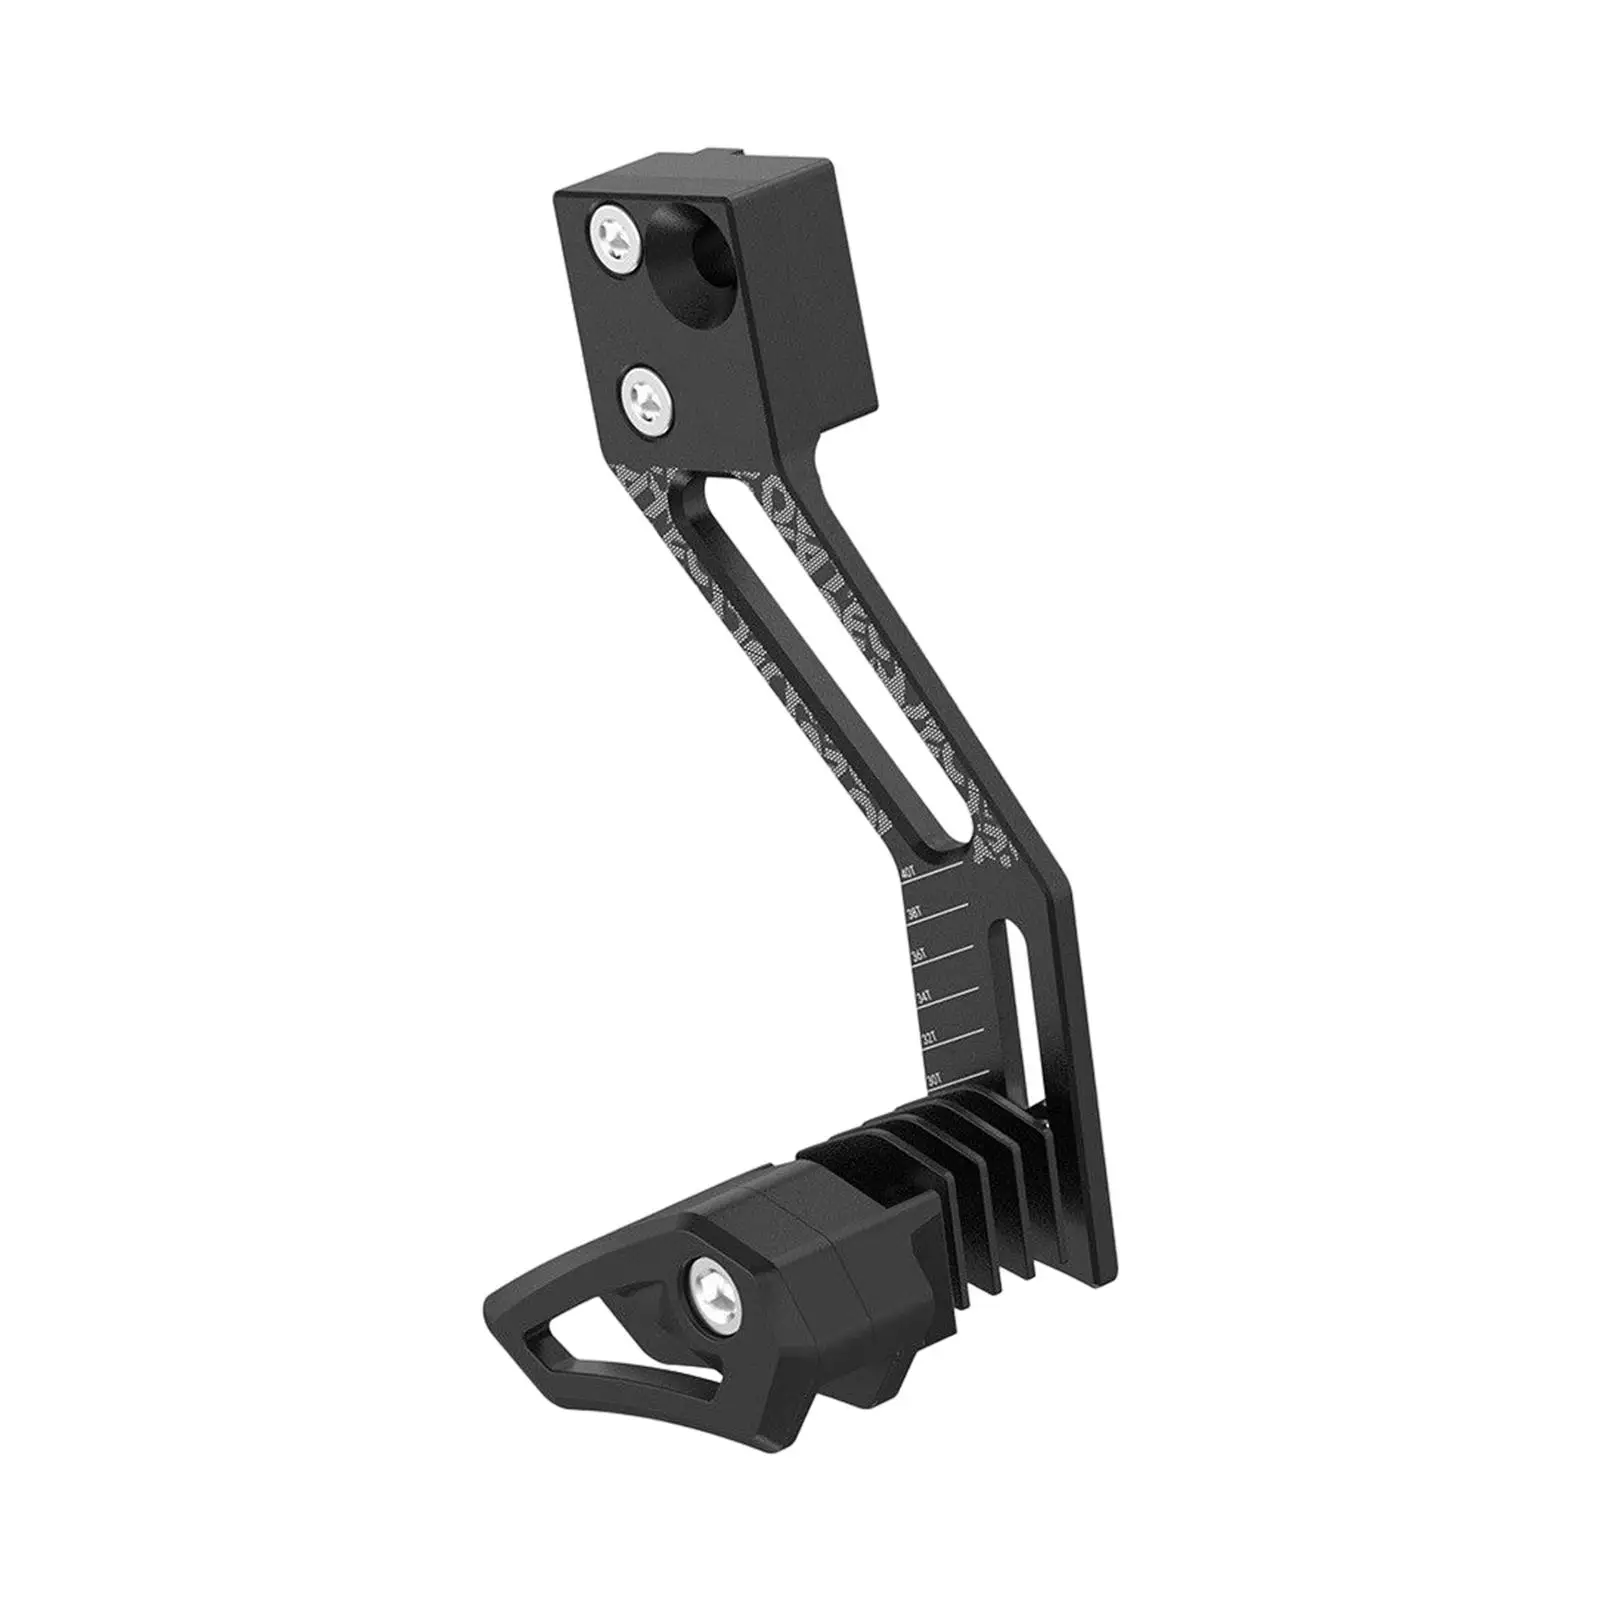 Aluminum Alloy Chain Guide D Type Clamp Mount for Mountainbike Road Bike